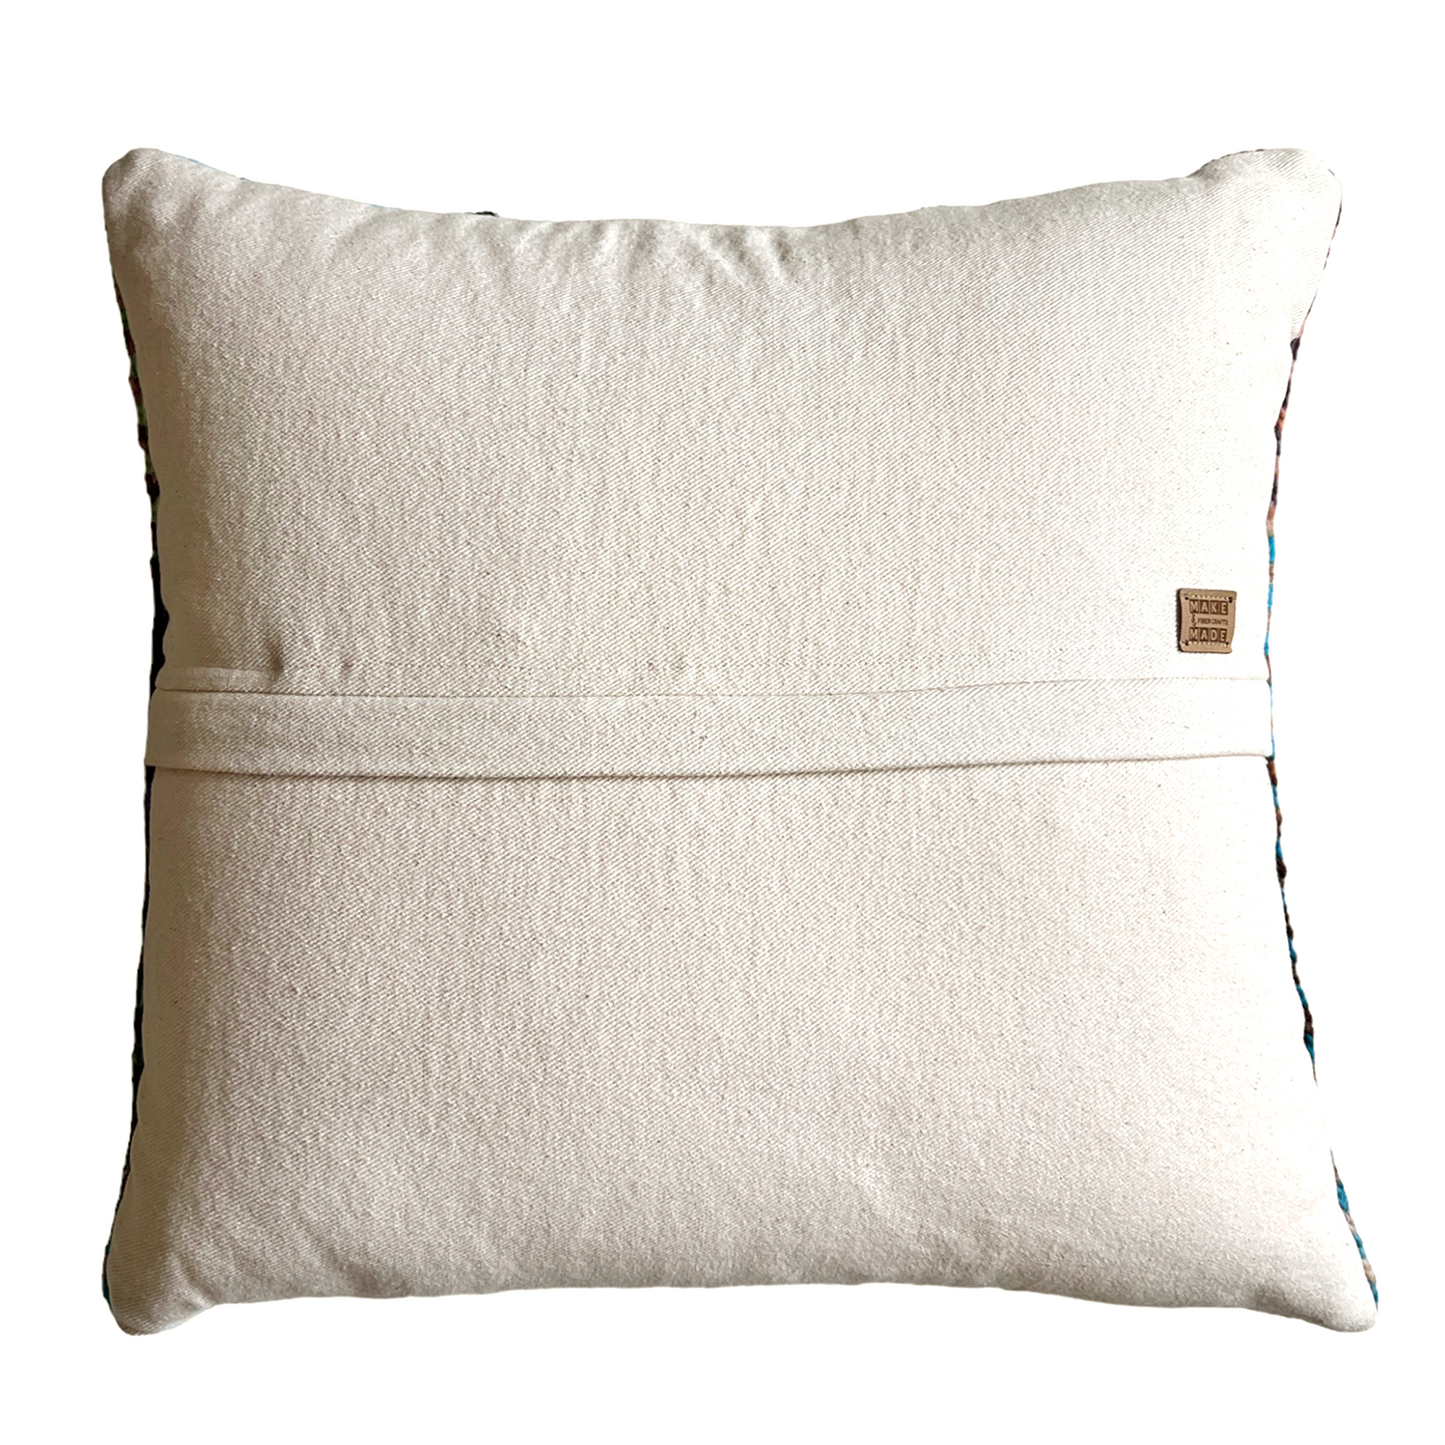 The back side of this pillow is natural bull denim. A hidden zipper runs horizontally through the middle of the pillow and includes a leather Make & Made Fiber Crafts label.